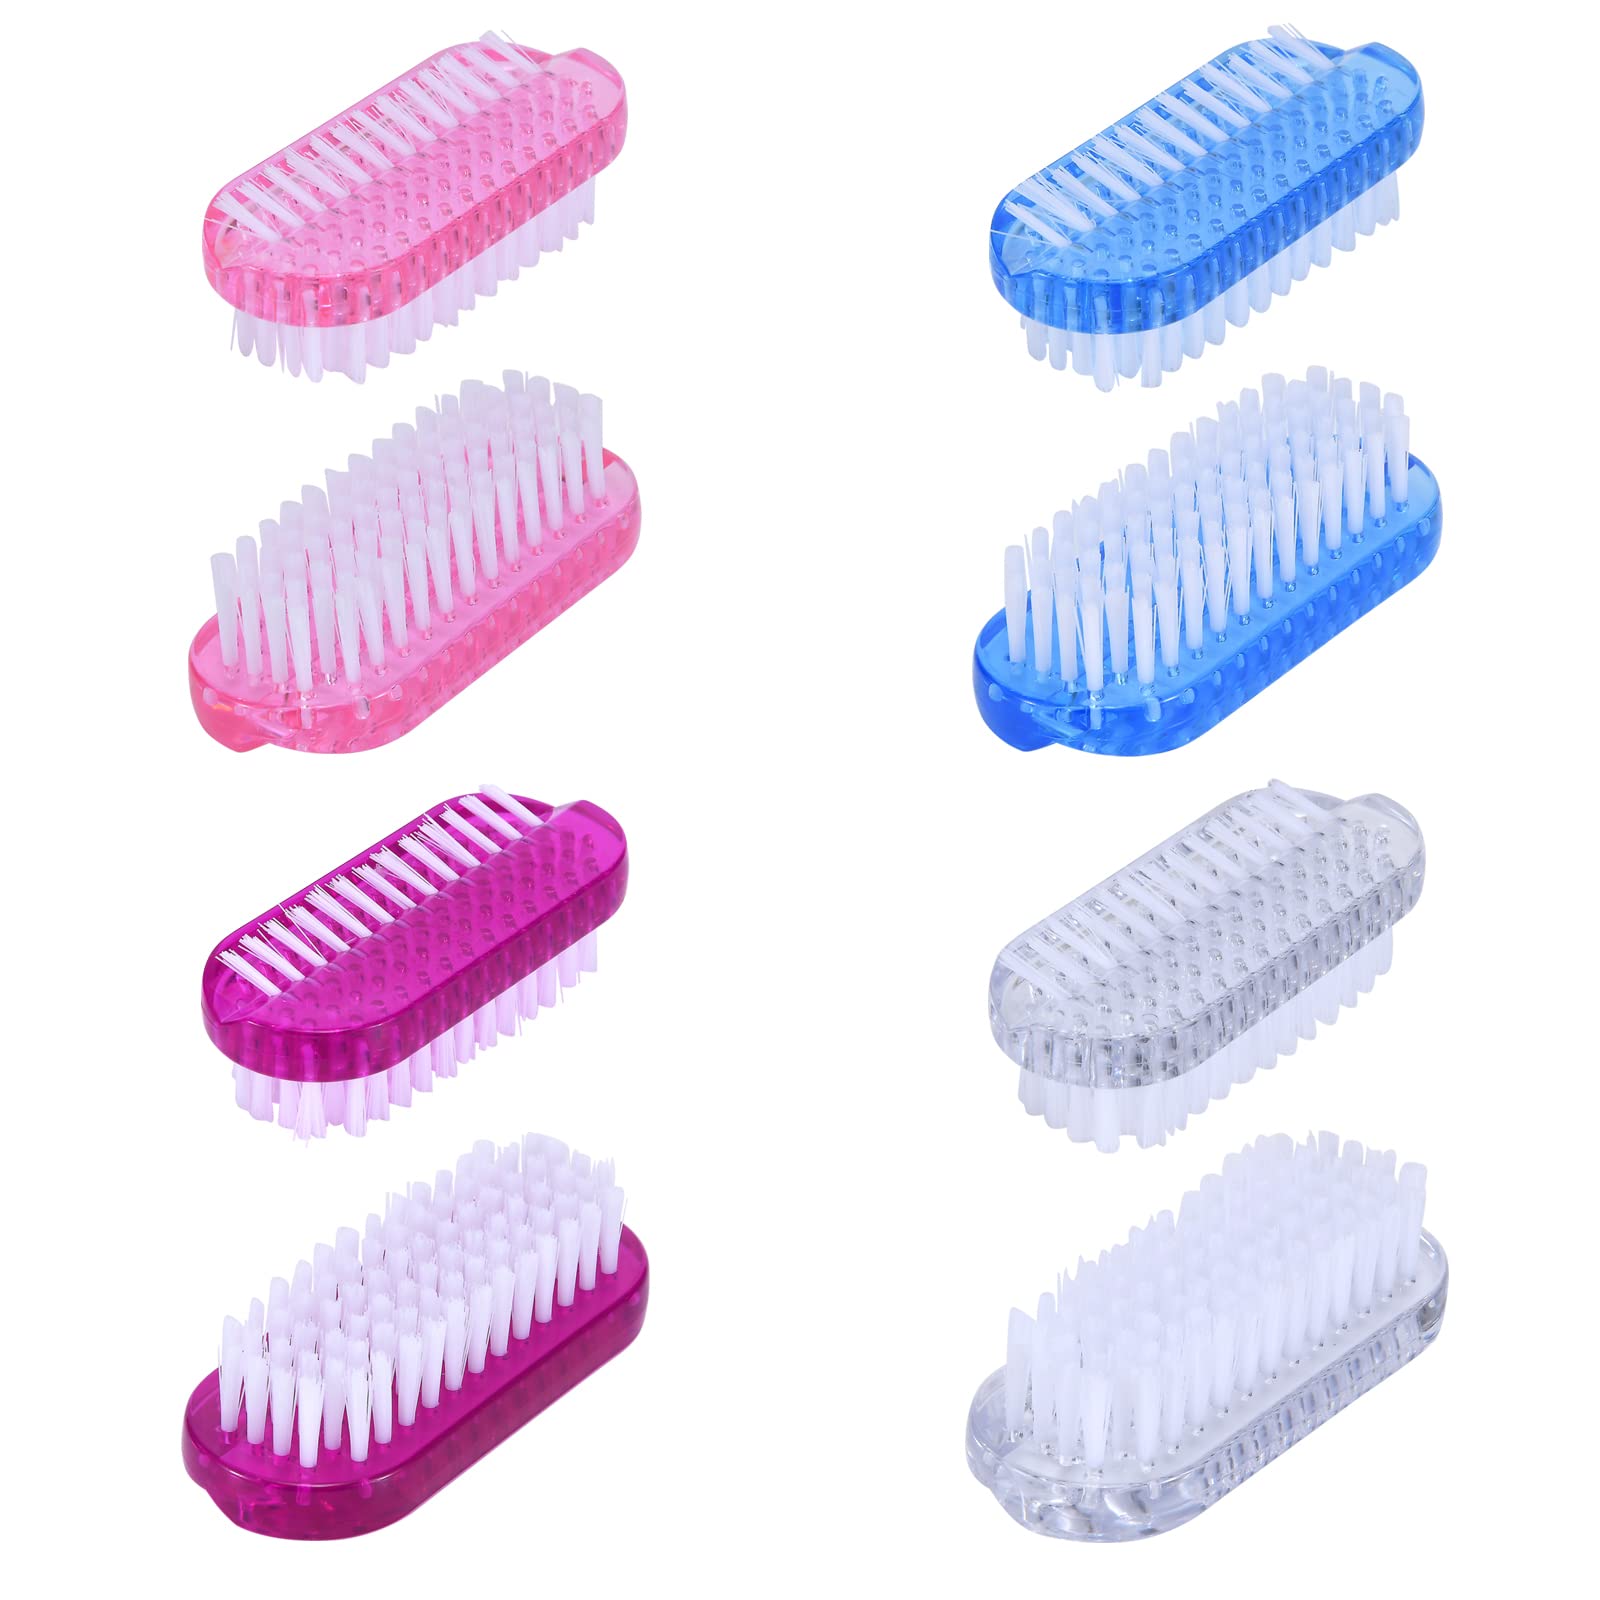 Dual-Sided Cleaning Brush